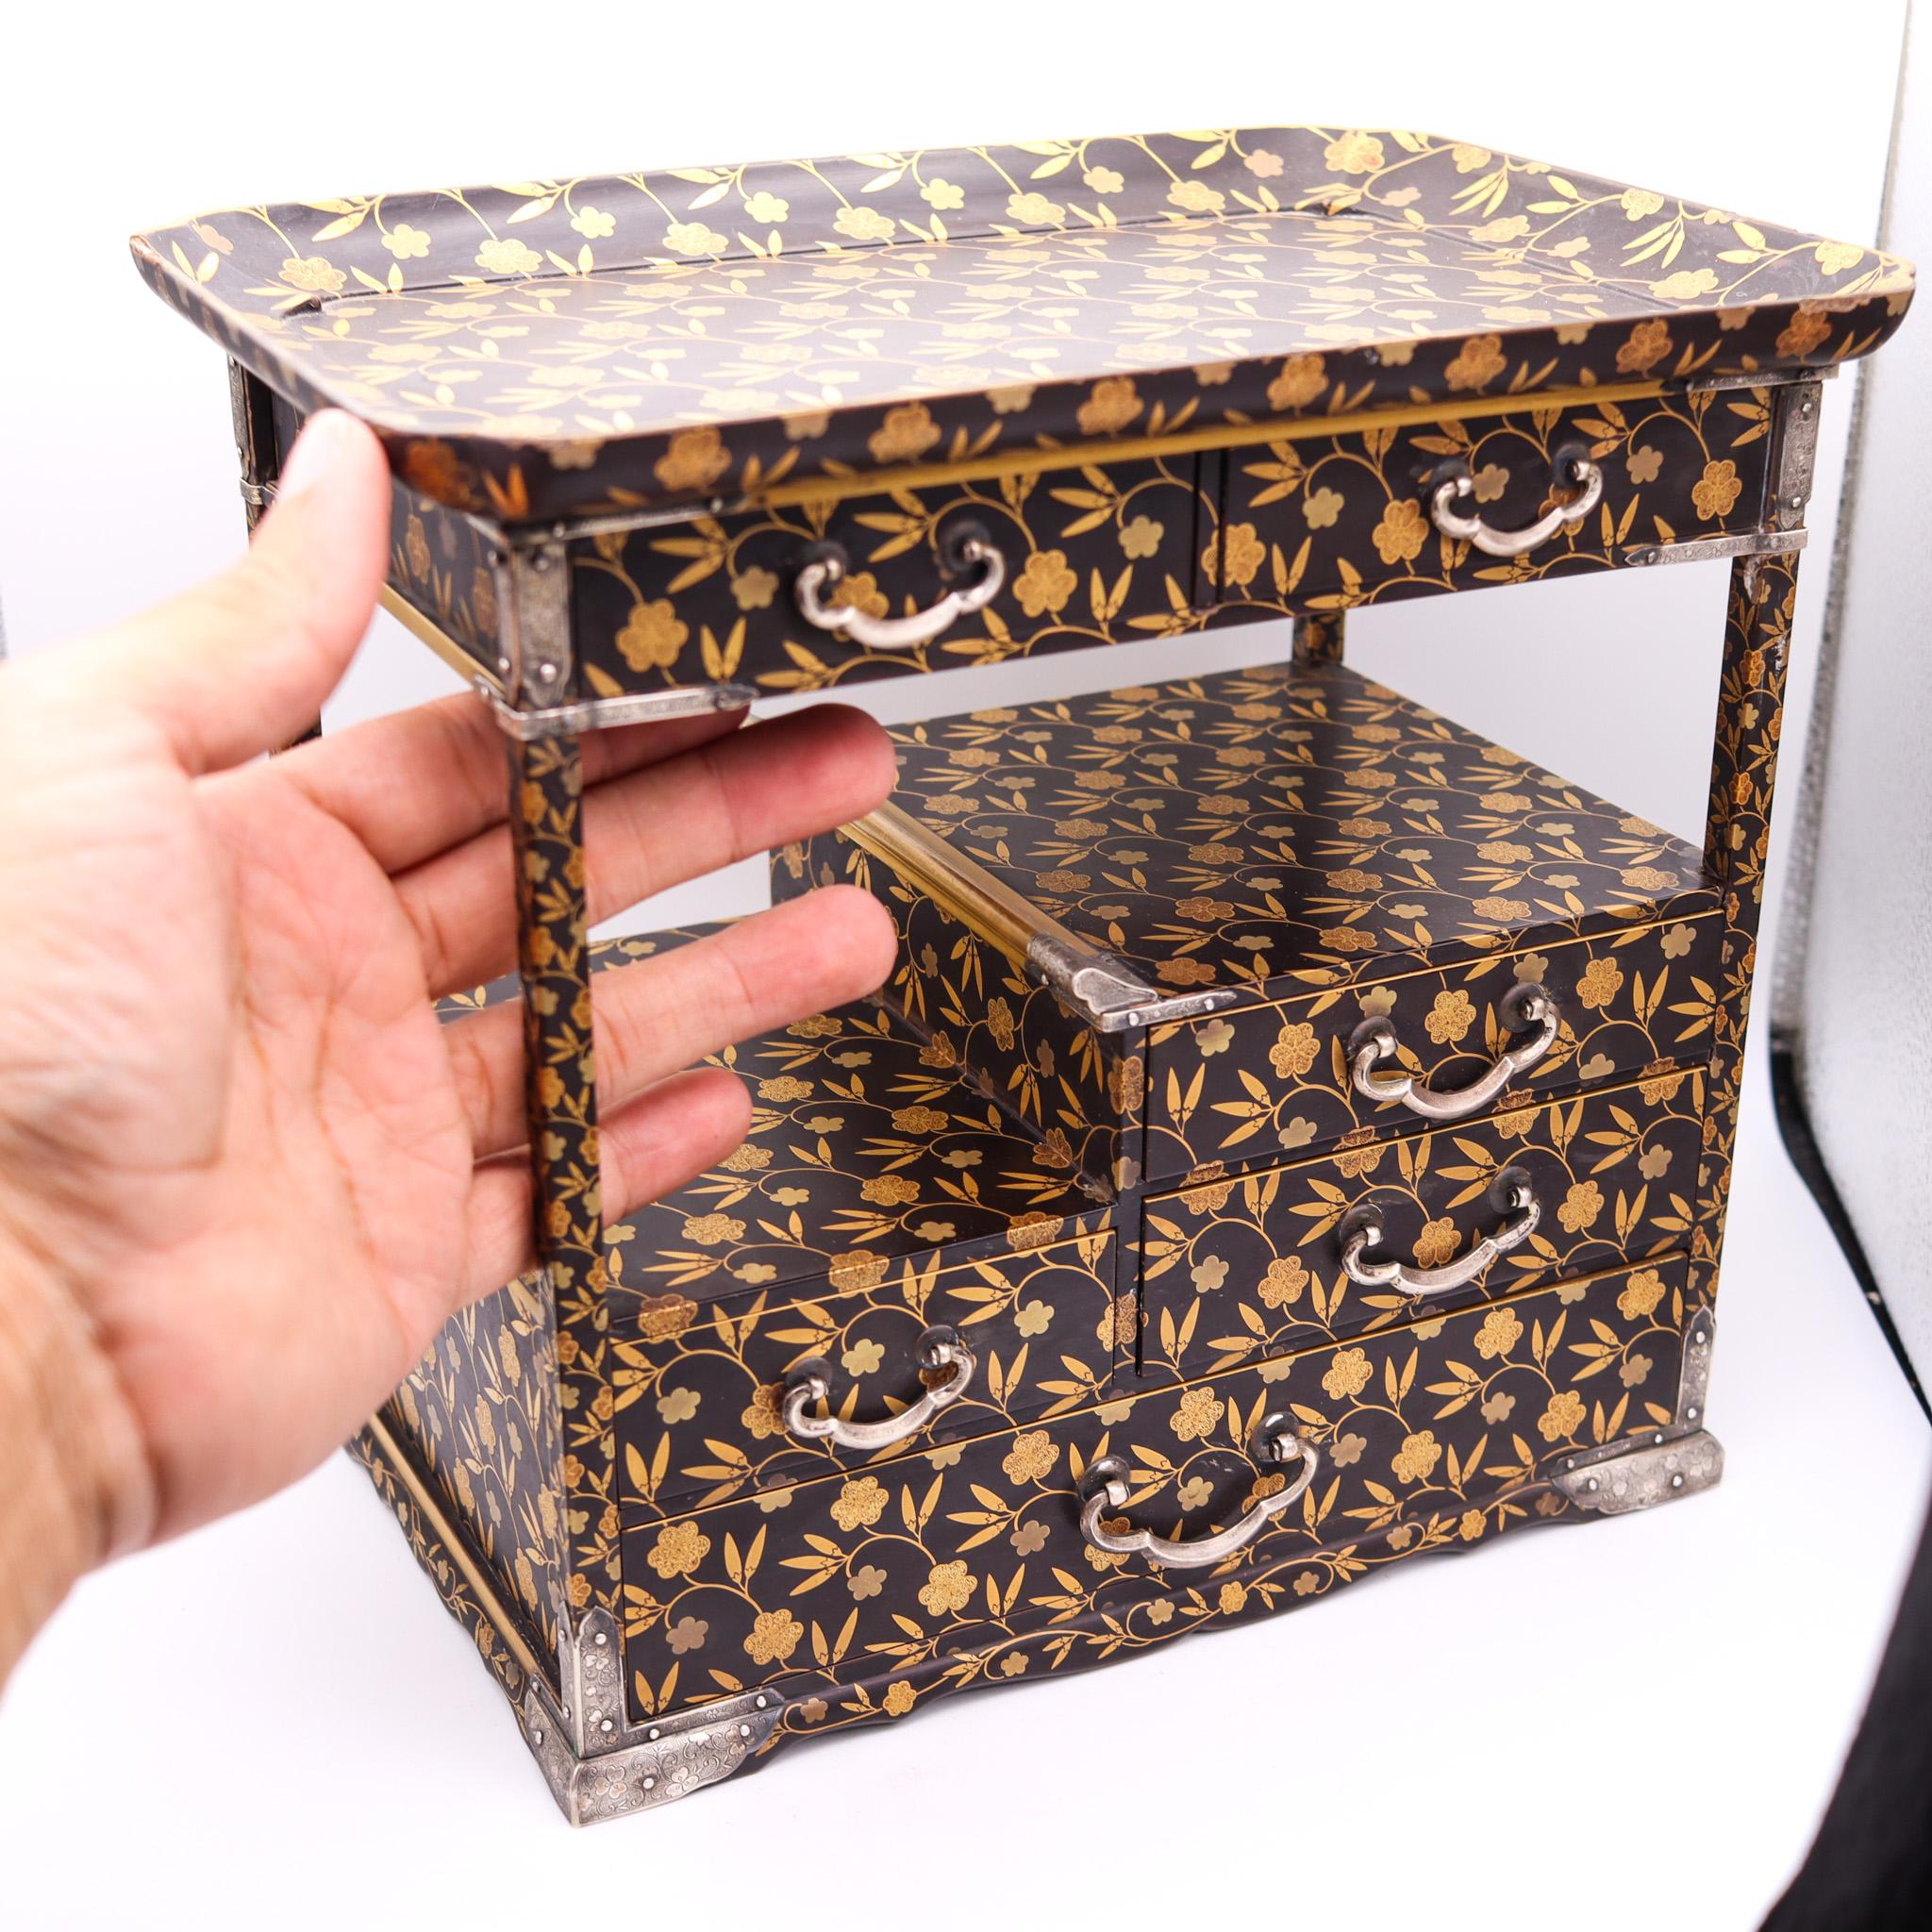 Japan 1900 Meiji Miniature Hanagamidai Cabinet in Gilded Wood & Sterling Silver For Sale 2